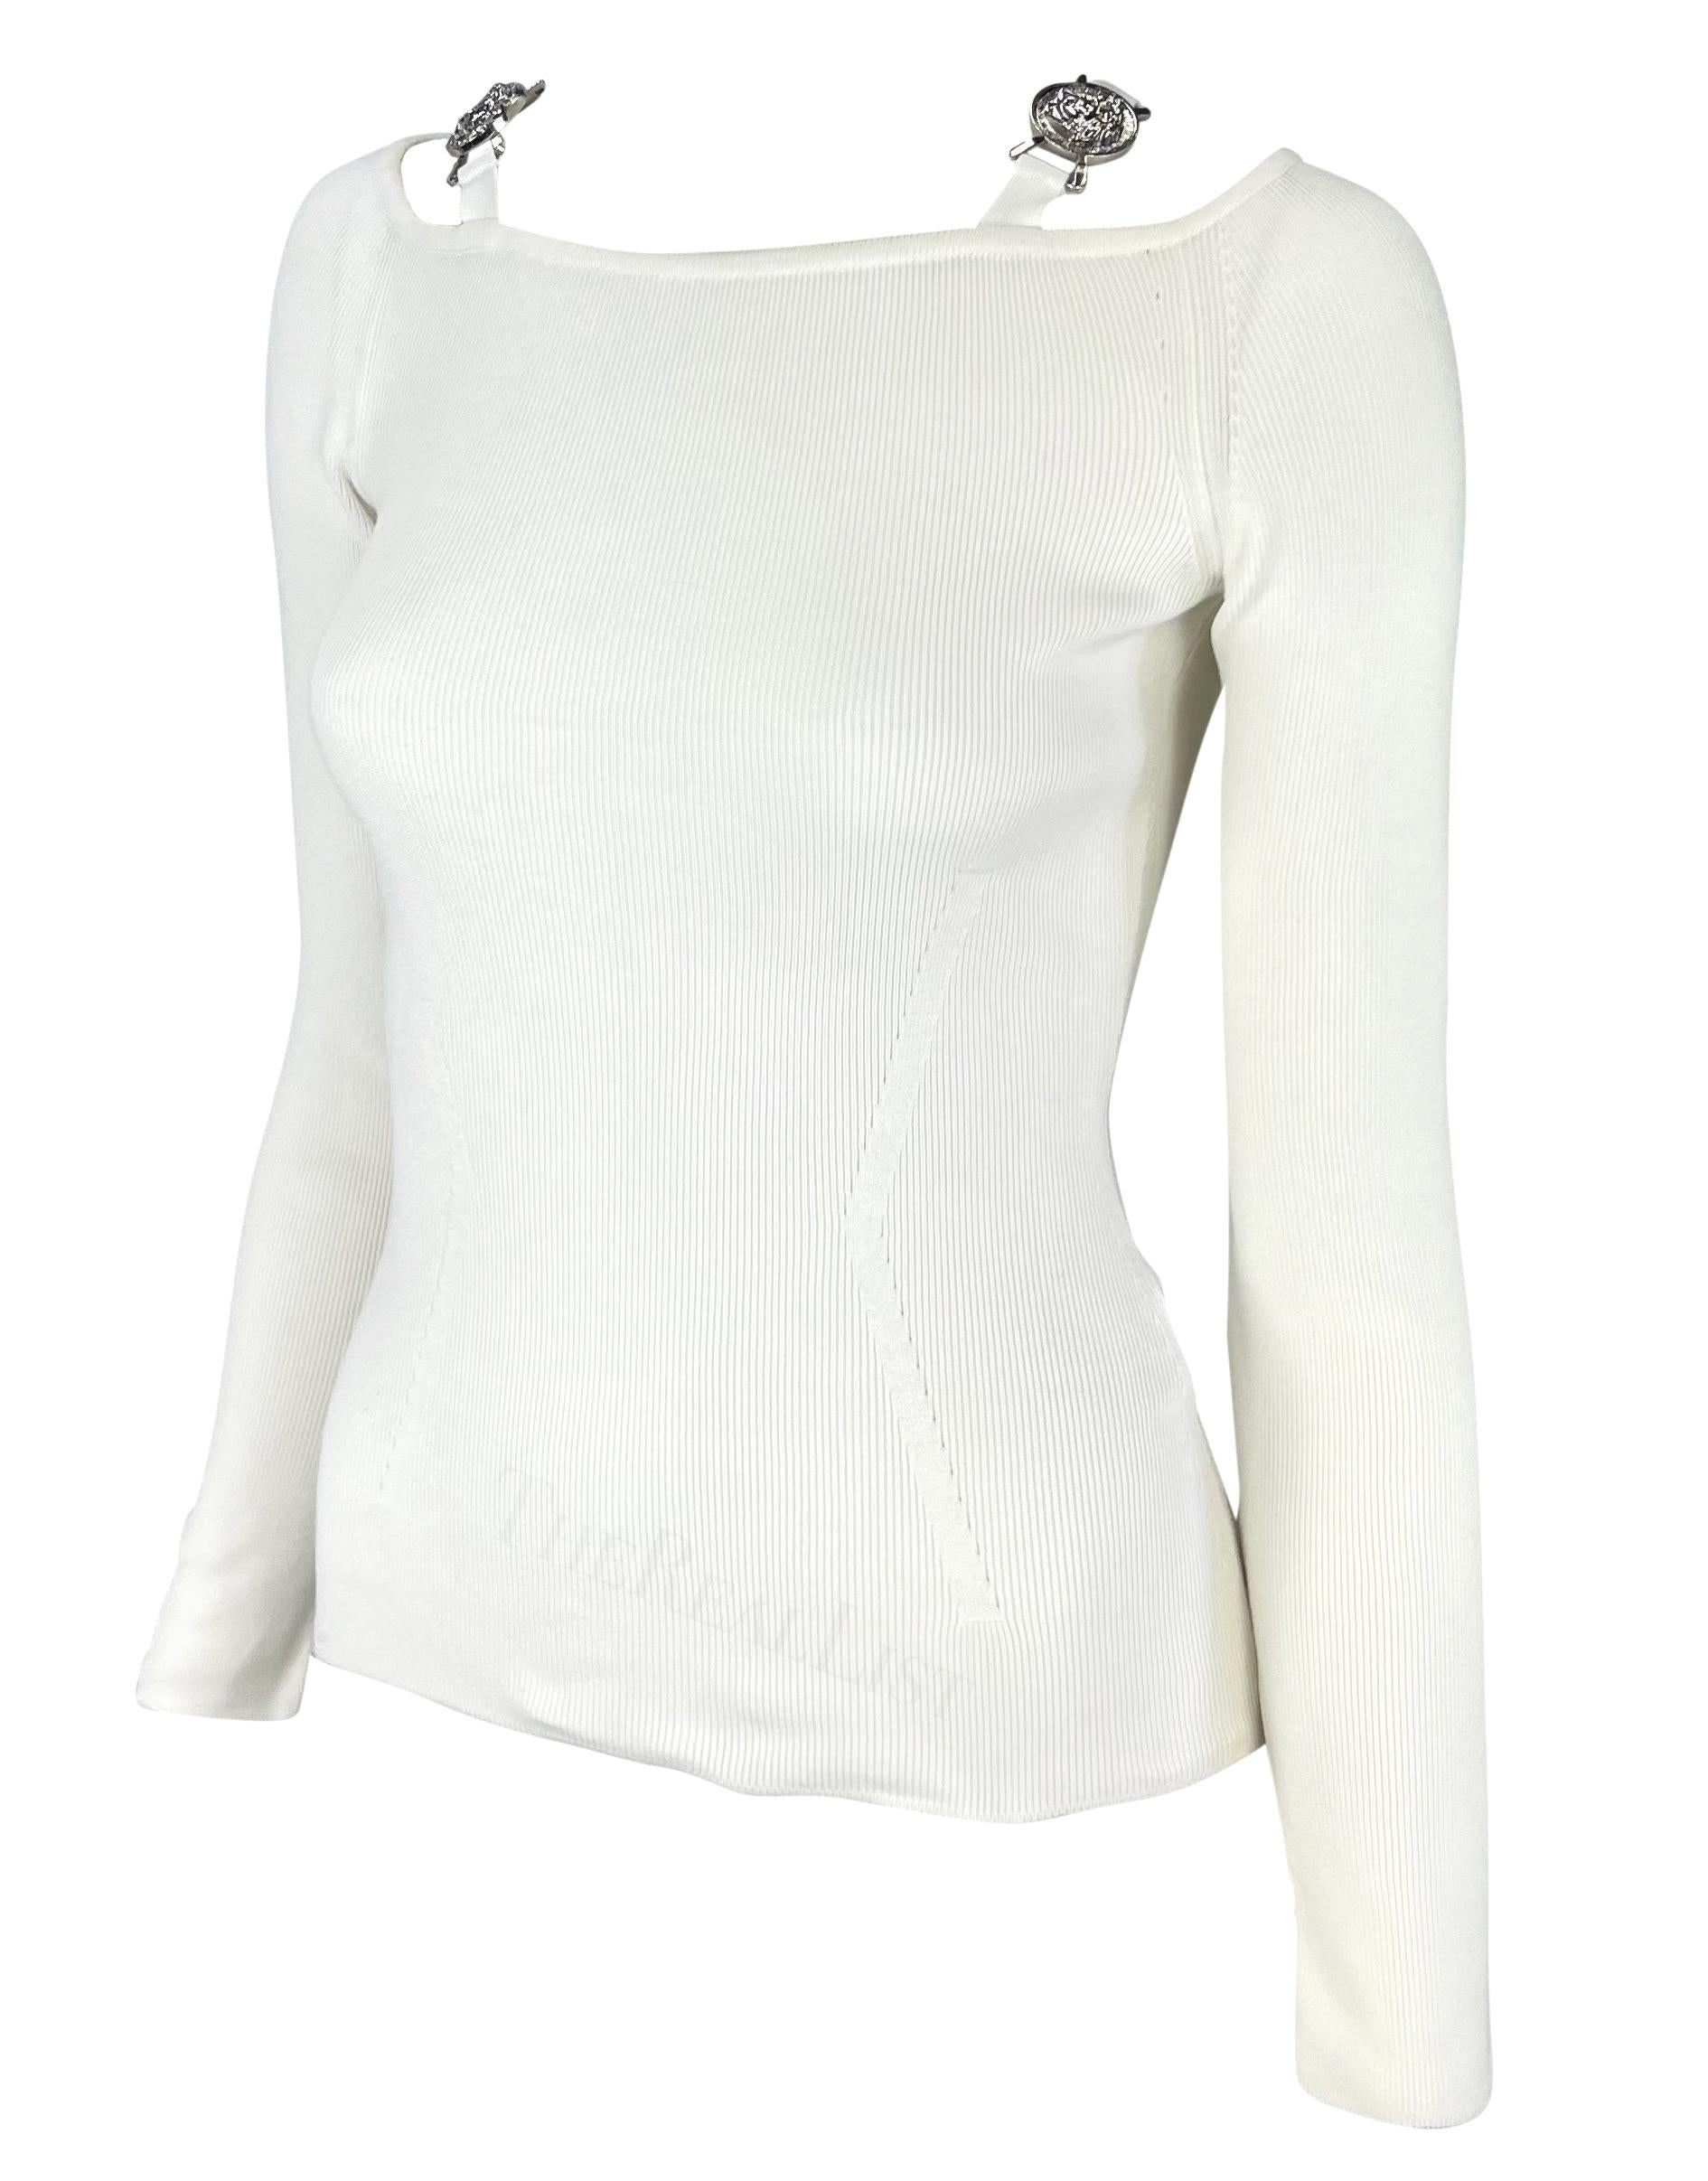 S/S 2005 Versace by Donatella Medusa Medallion Buckle White Knit Stretch Top In Good Condition For Sale In West Hollywood, CA